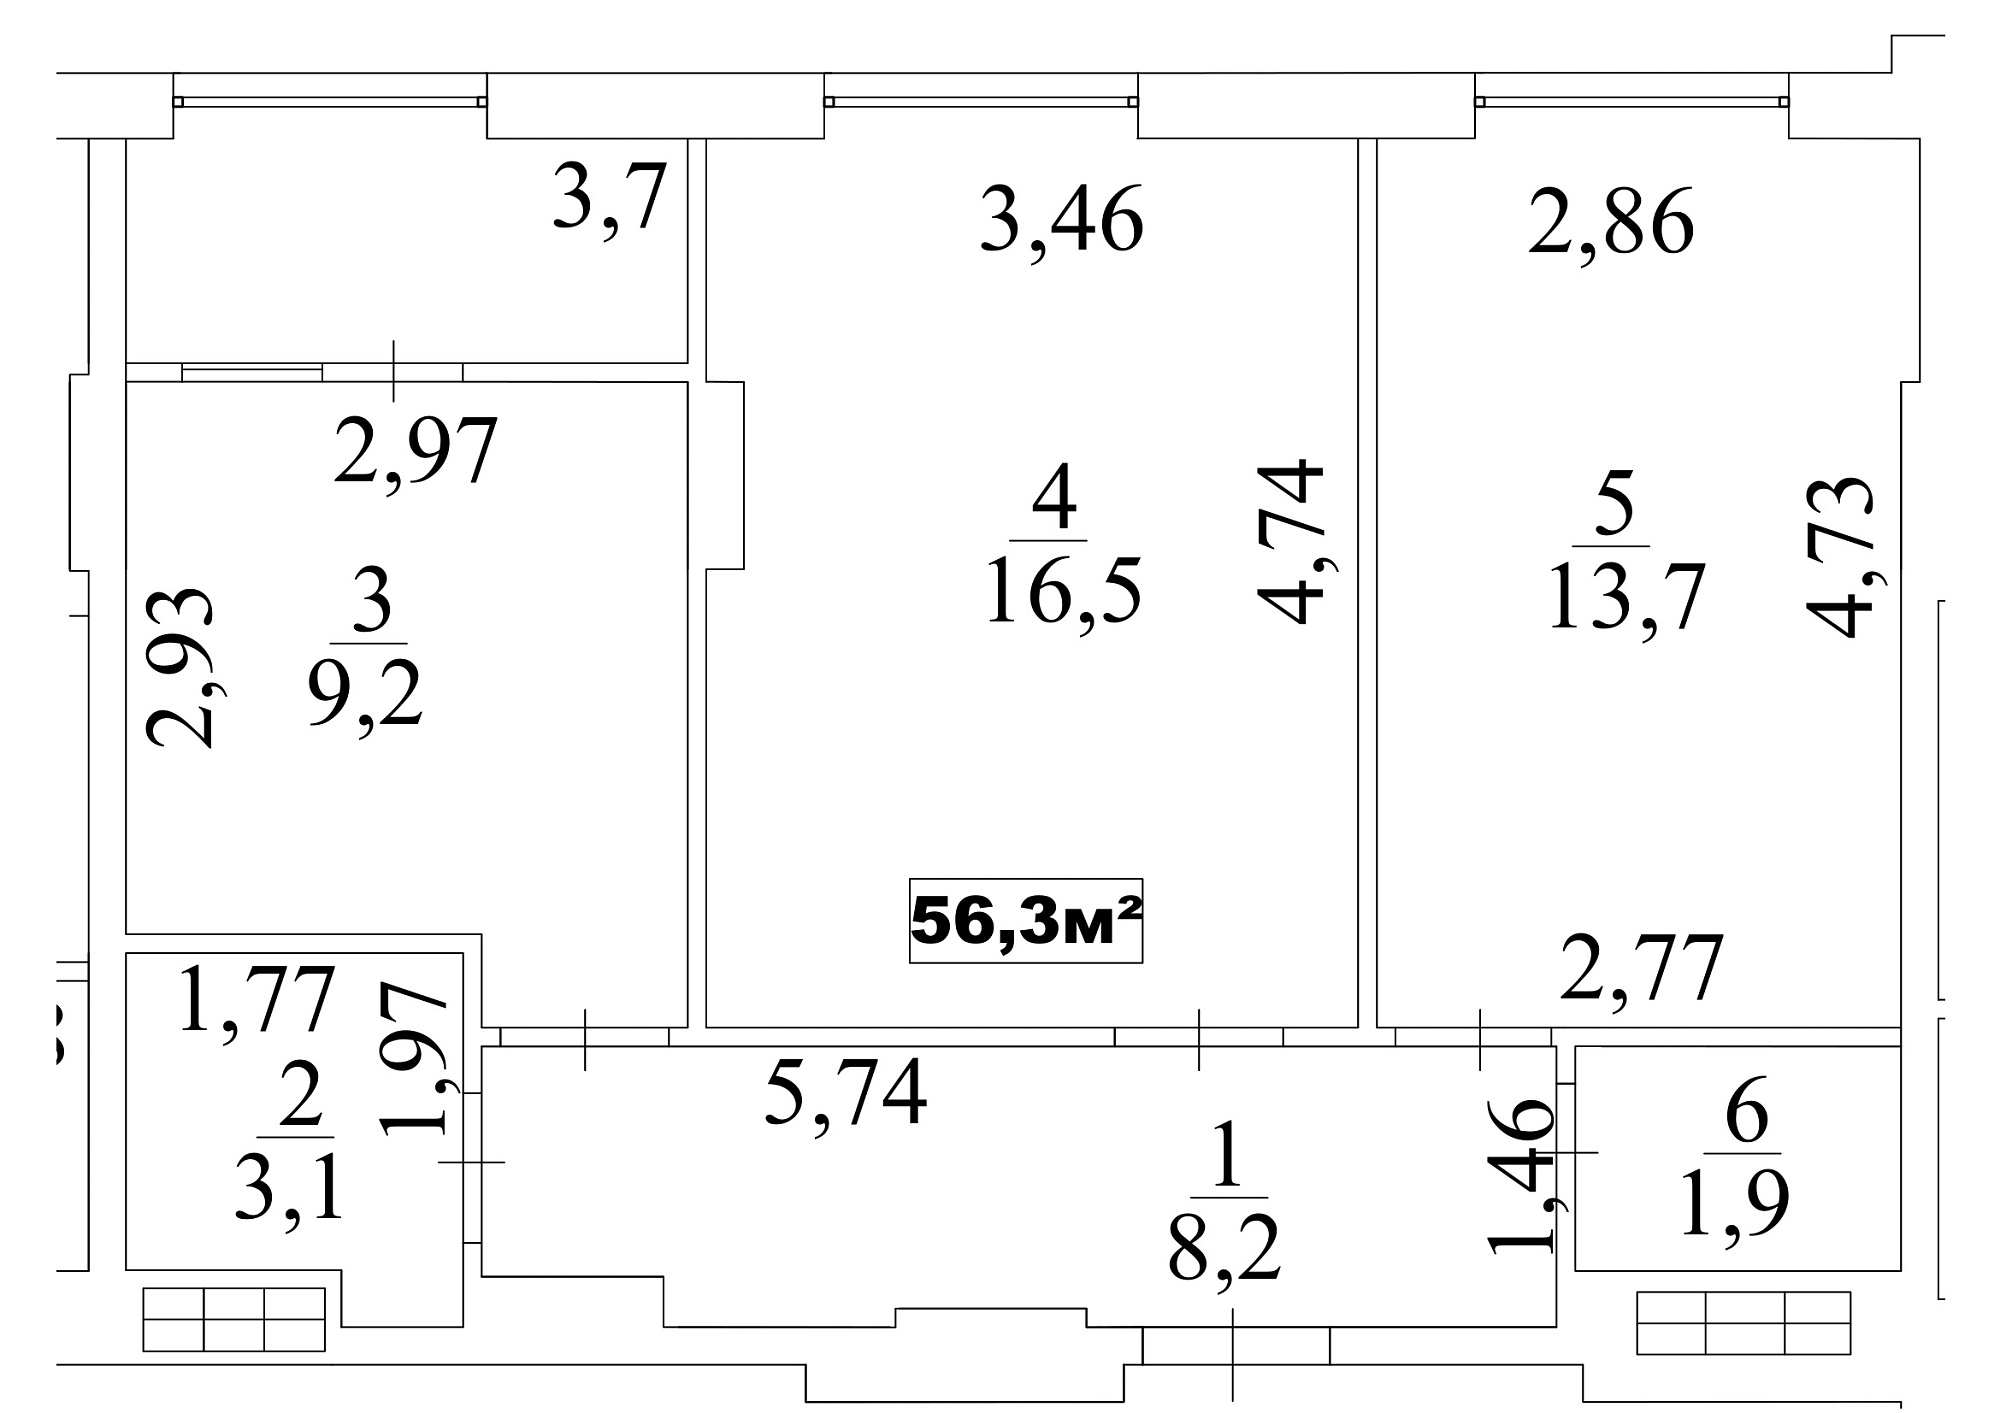 Planning 2-rm flats area 56.3m2, AB-10-02/00013.